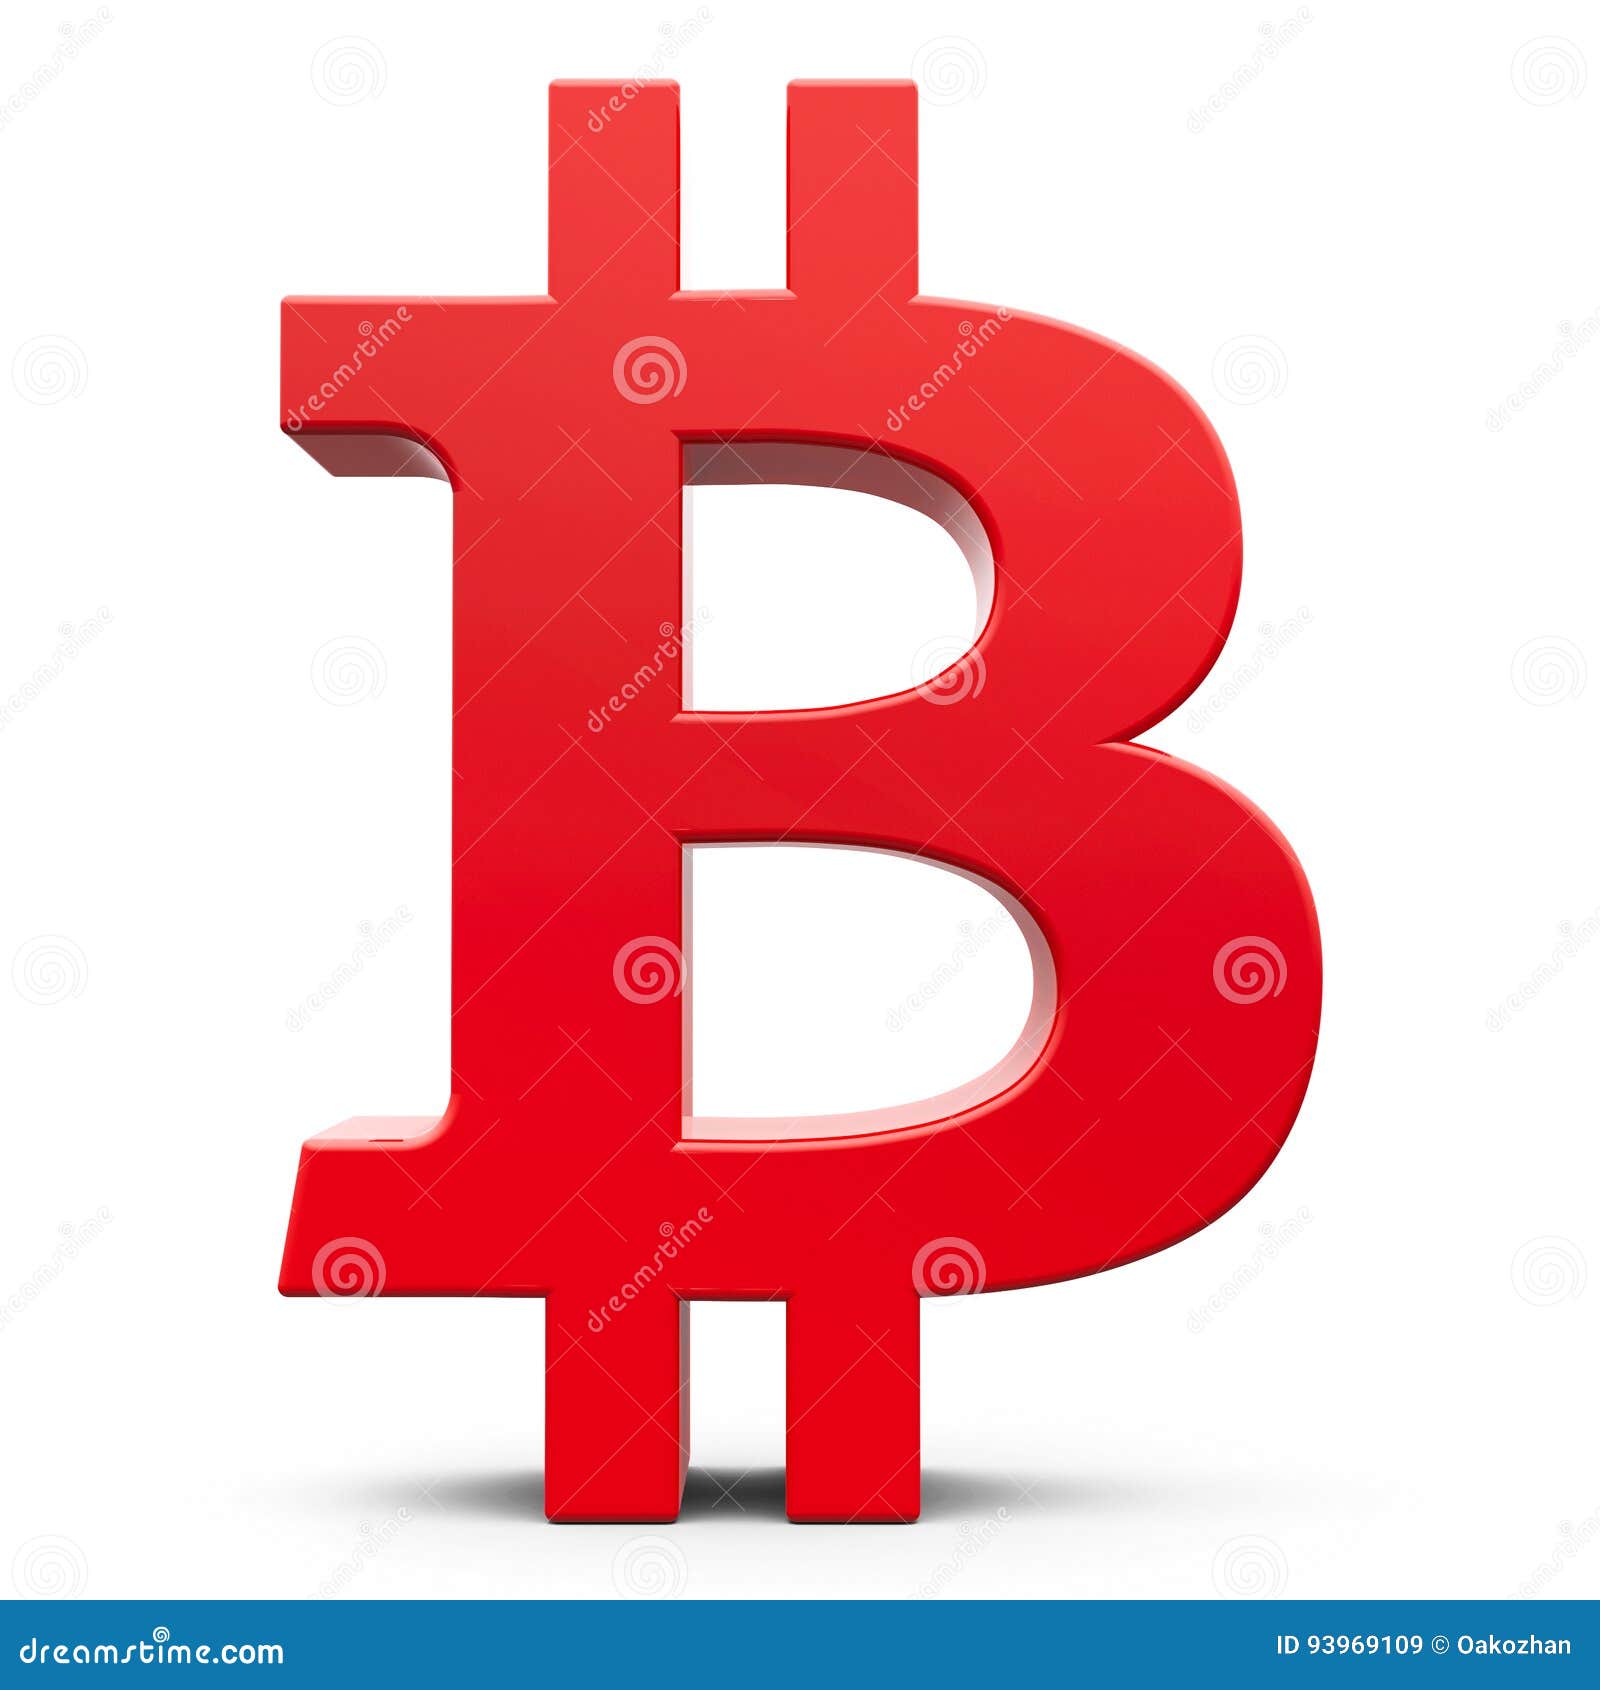 Red bitcoin sign stock illustration. Illustration of bank - 93969109